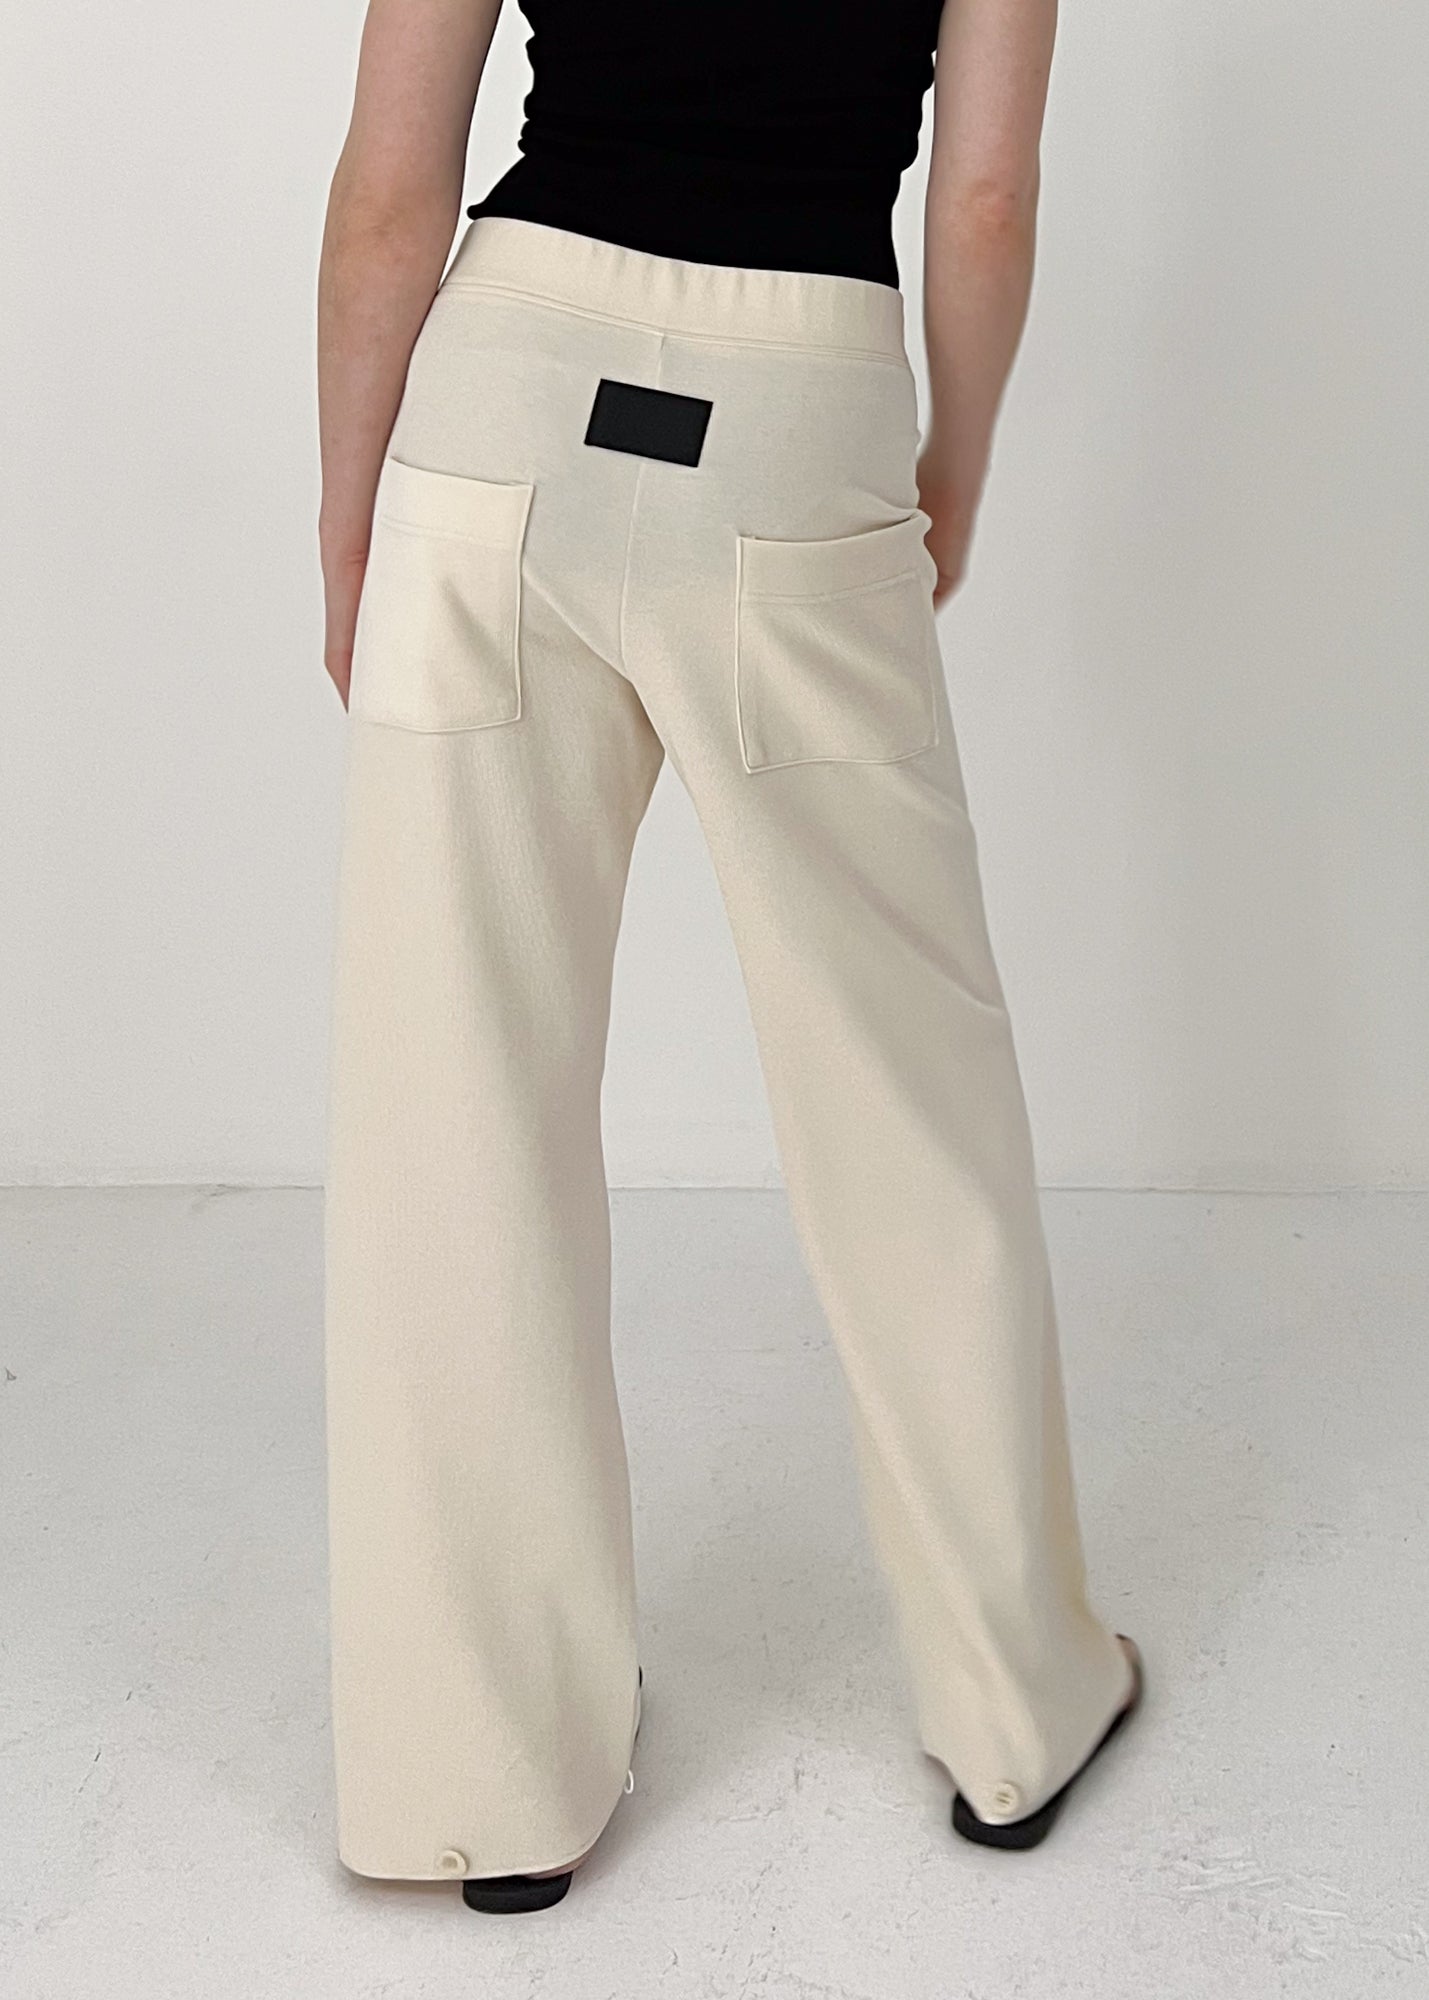 12 GALAXY SEMI-WIDE TROUSERS / STRETCH DOUBLE JERSEY - C10